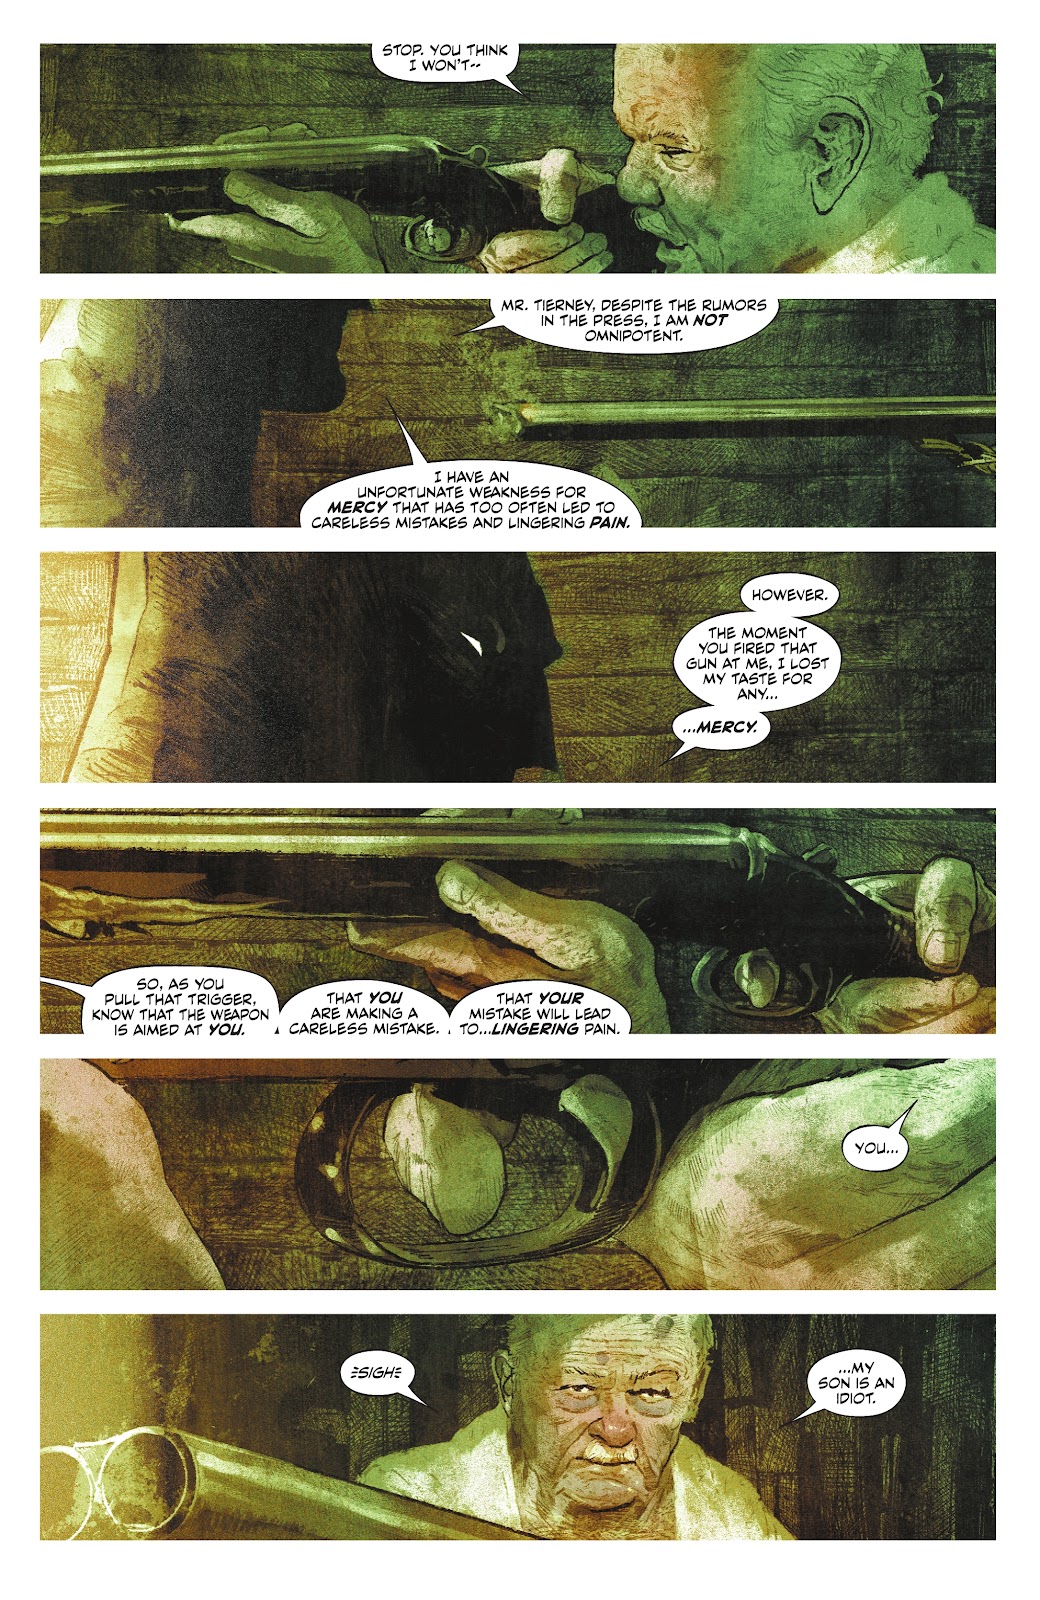 Batman: One Bad Day - The Riddler issue 1 - Page 33